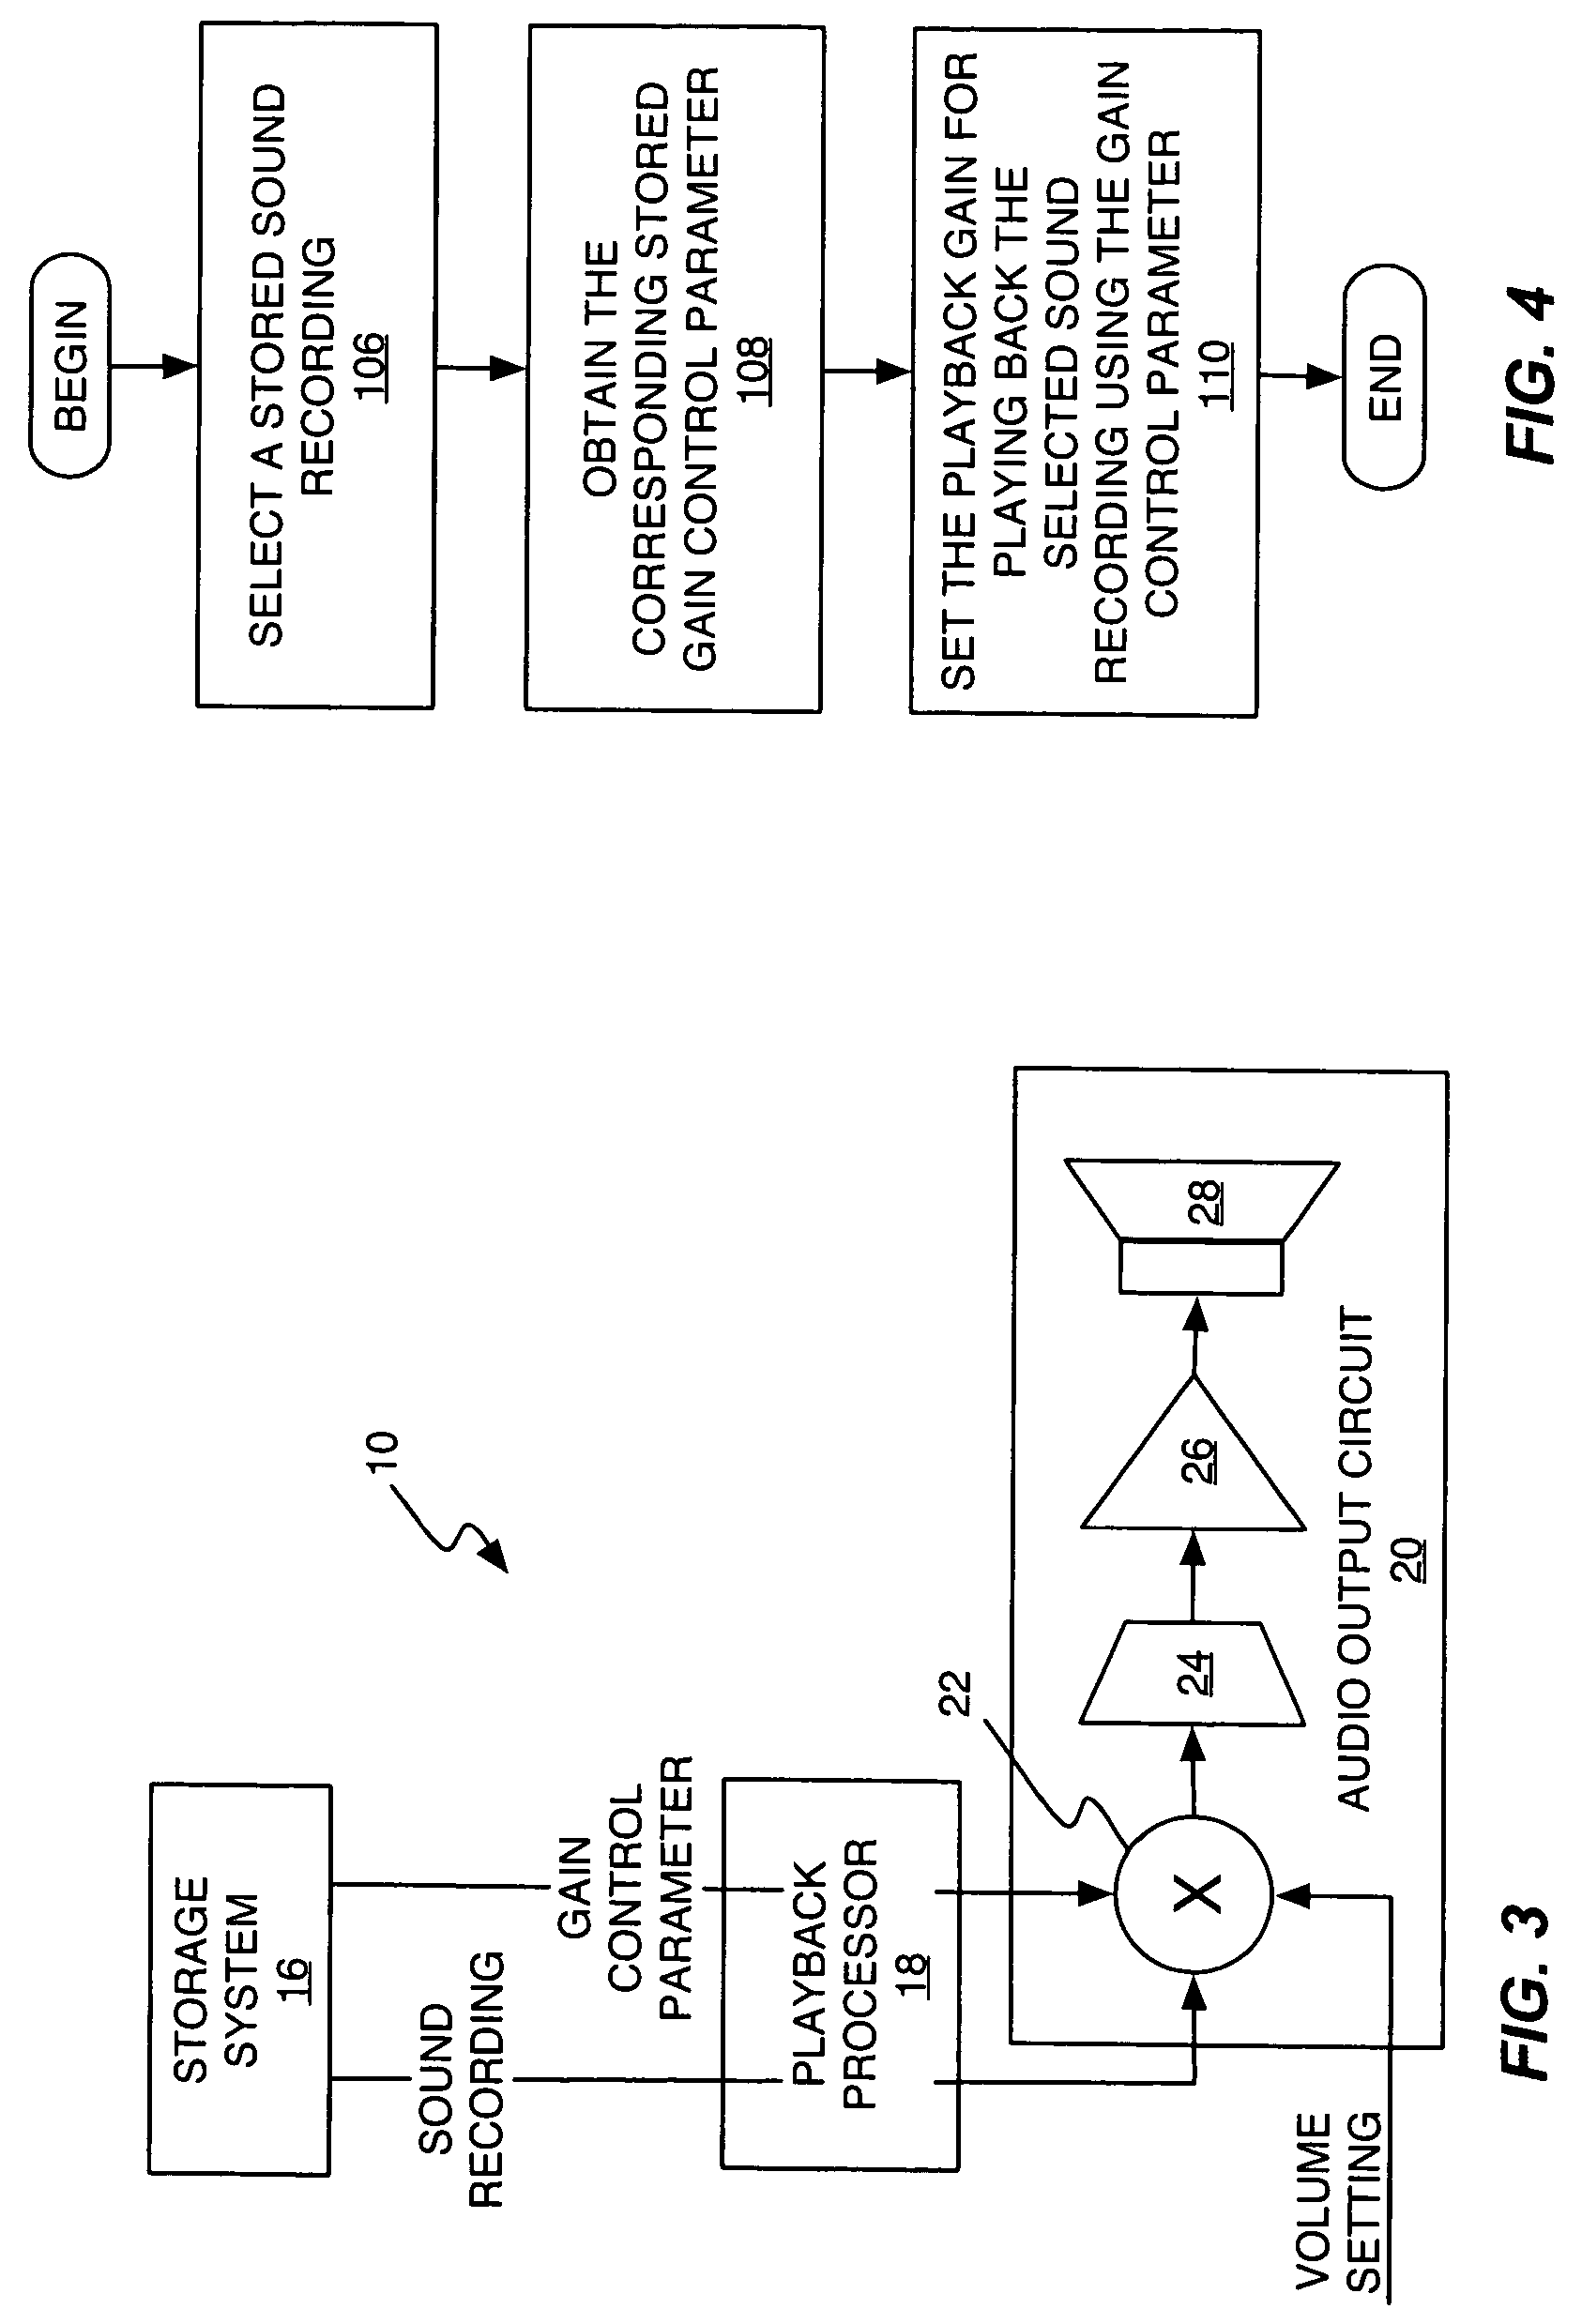 Method and apparatus for normalizing sound recording loudness